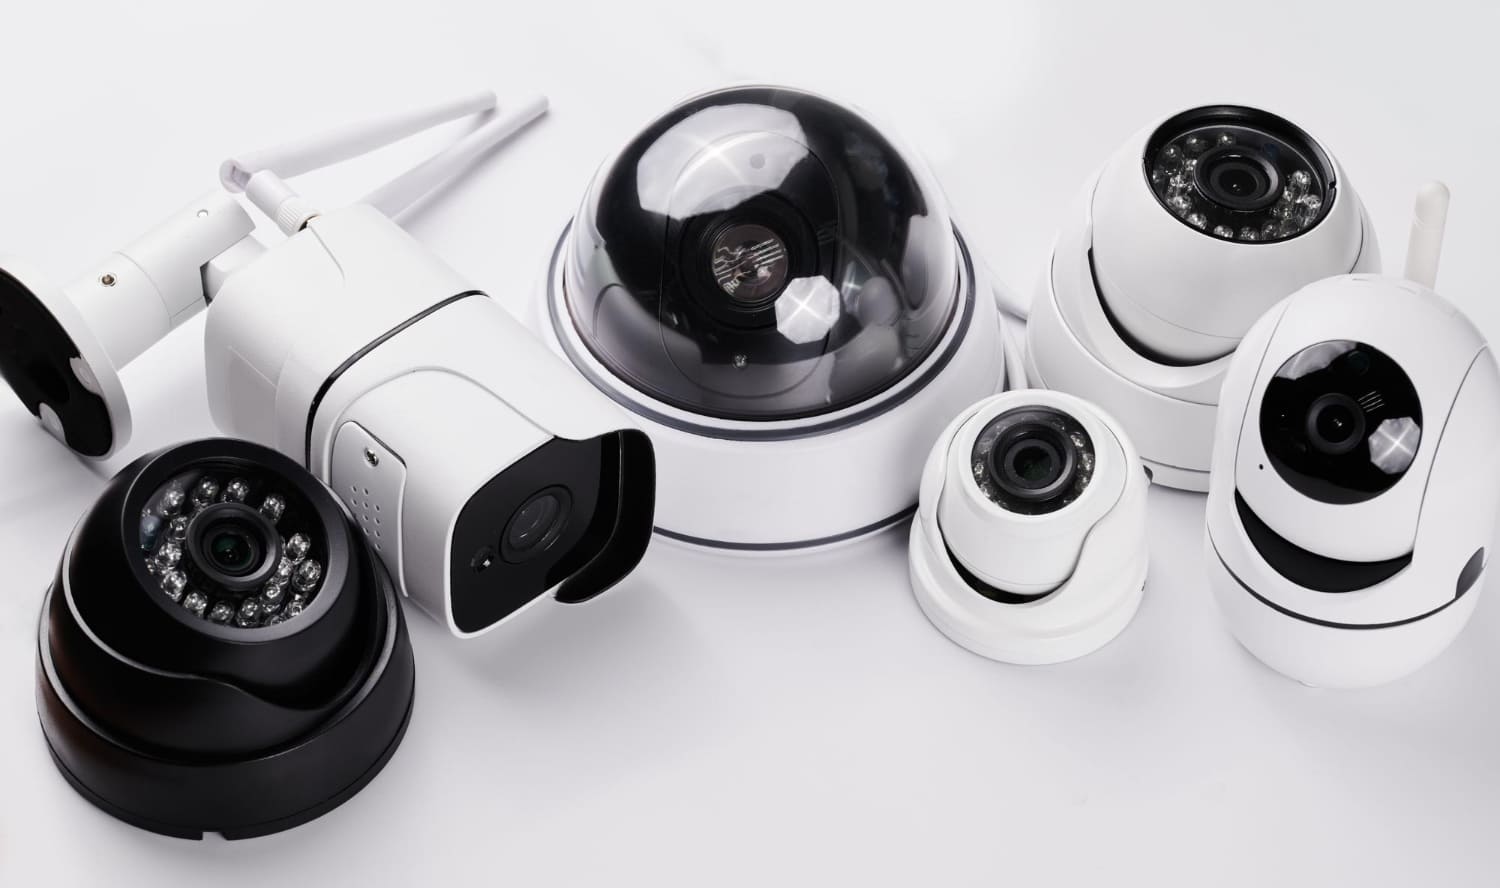 MOI Approved CCTV Companies in Qatar